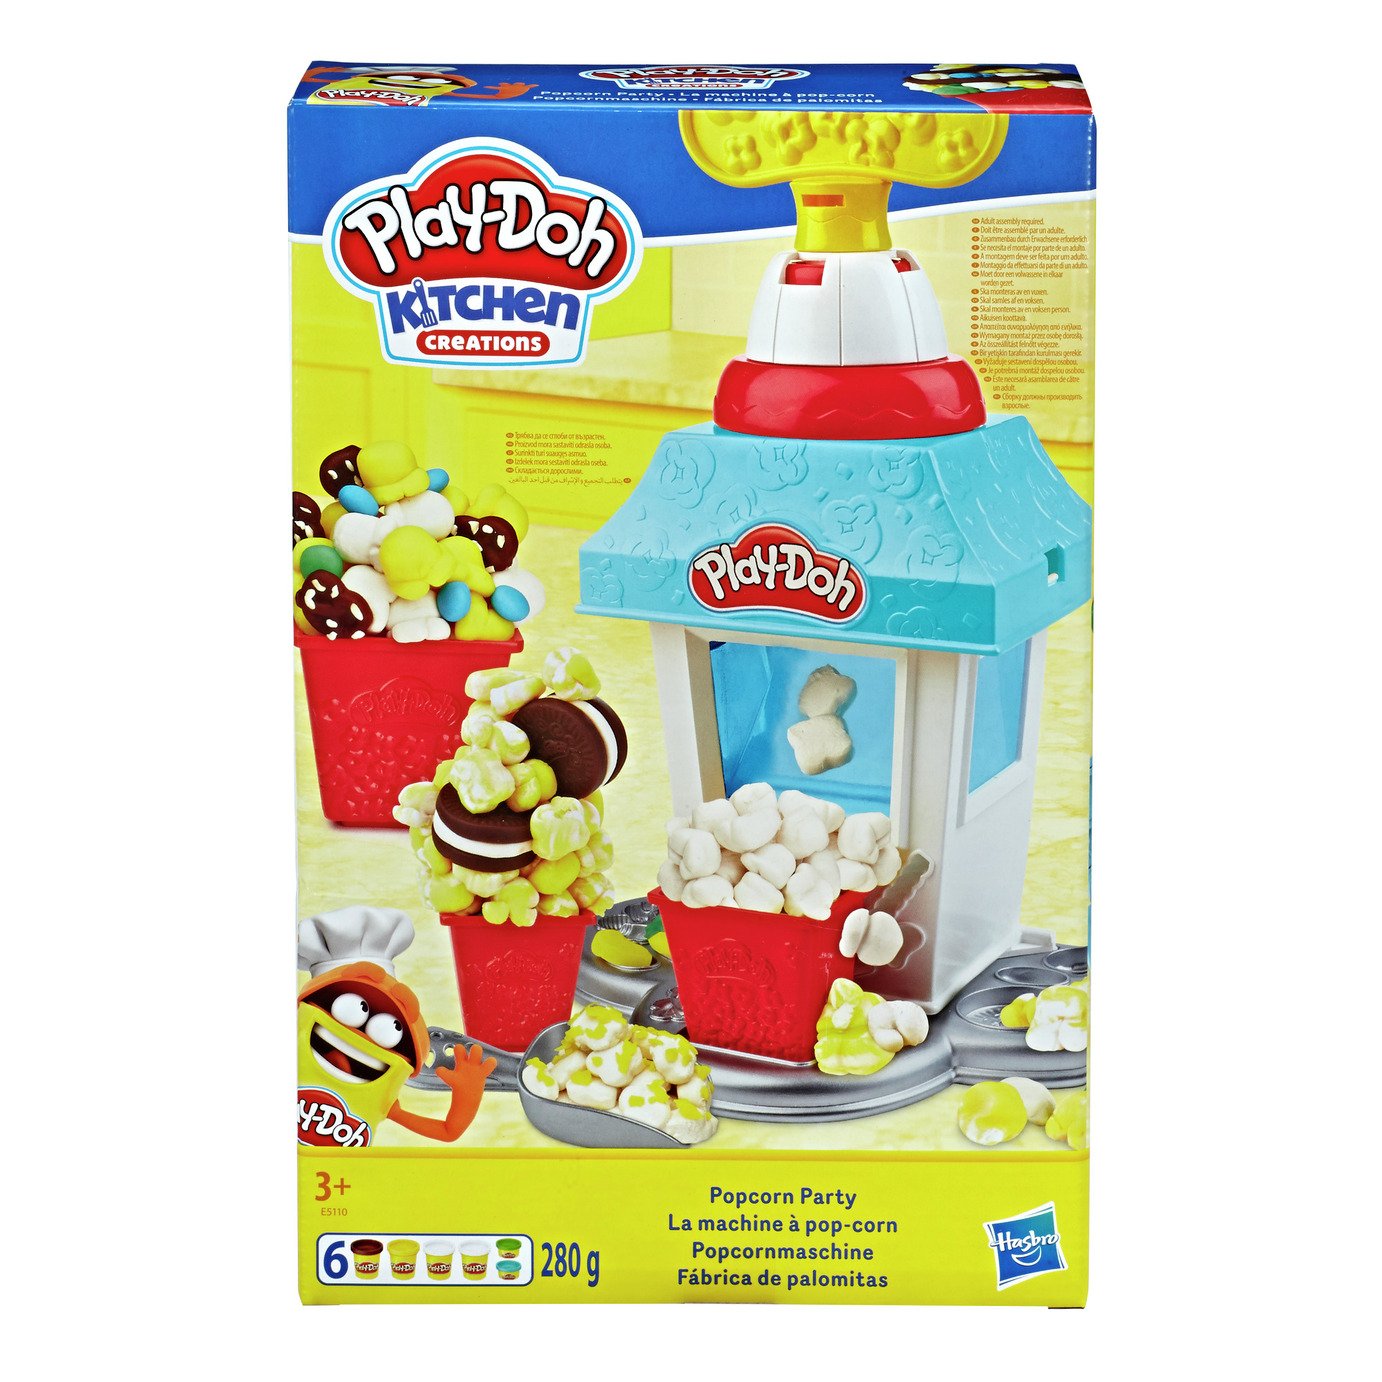 Play-Doh Popcorn Party Review